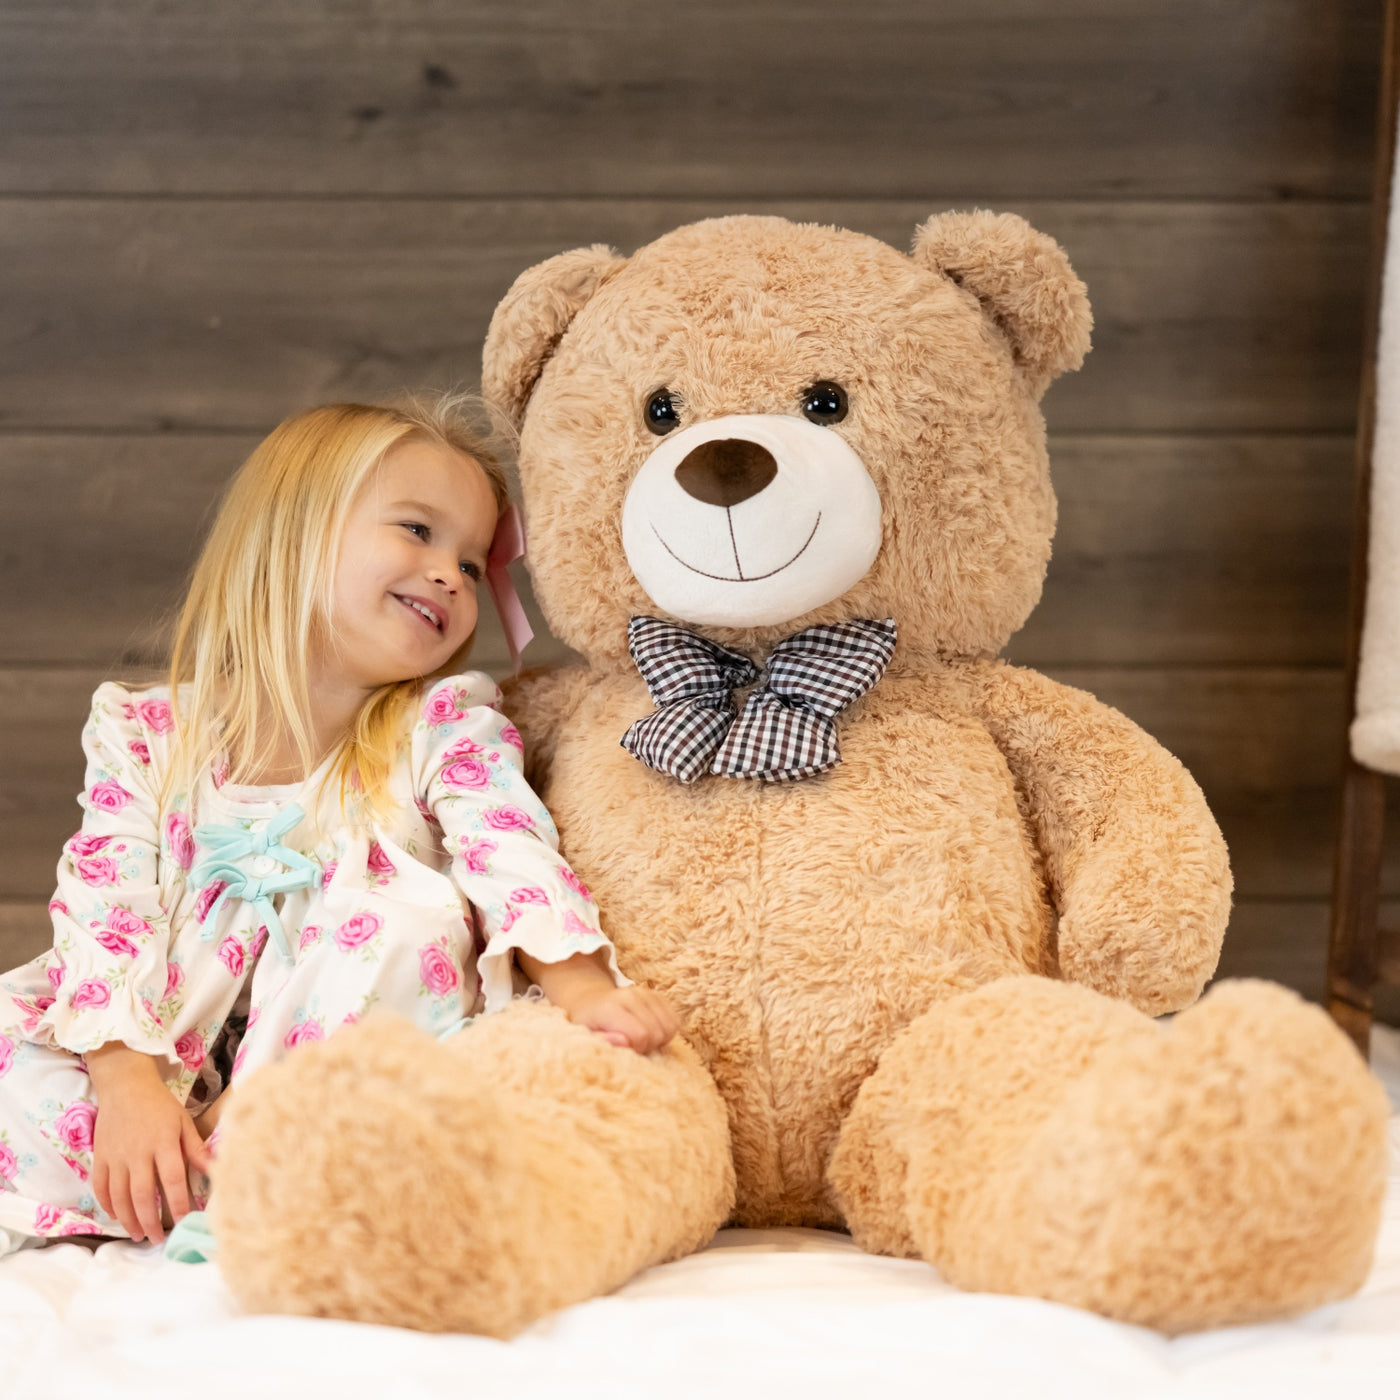 Giant Teddy Bear Stuffed Animal Toy, Light Brown, 47/55 Inches